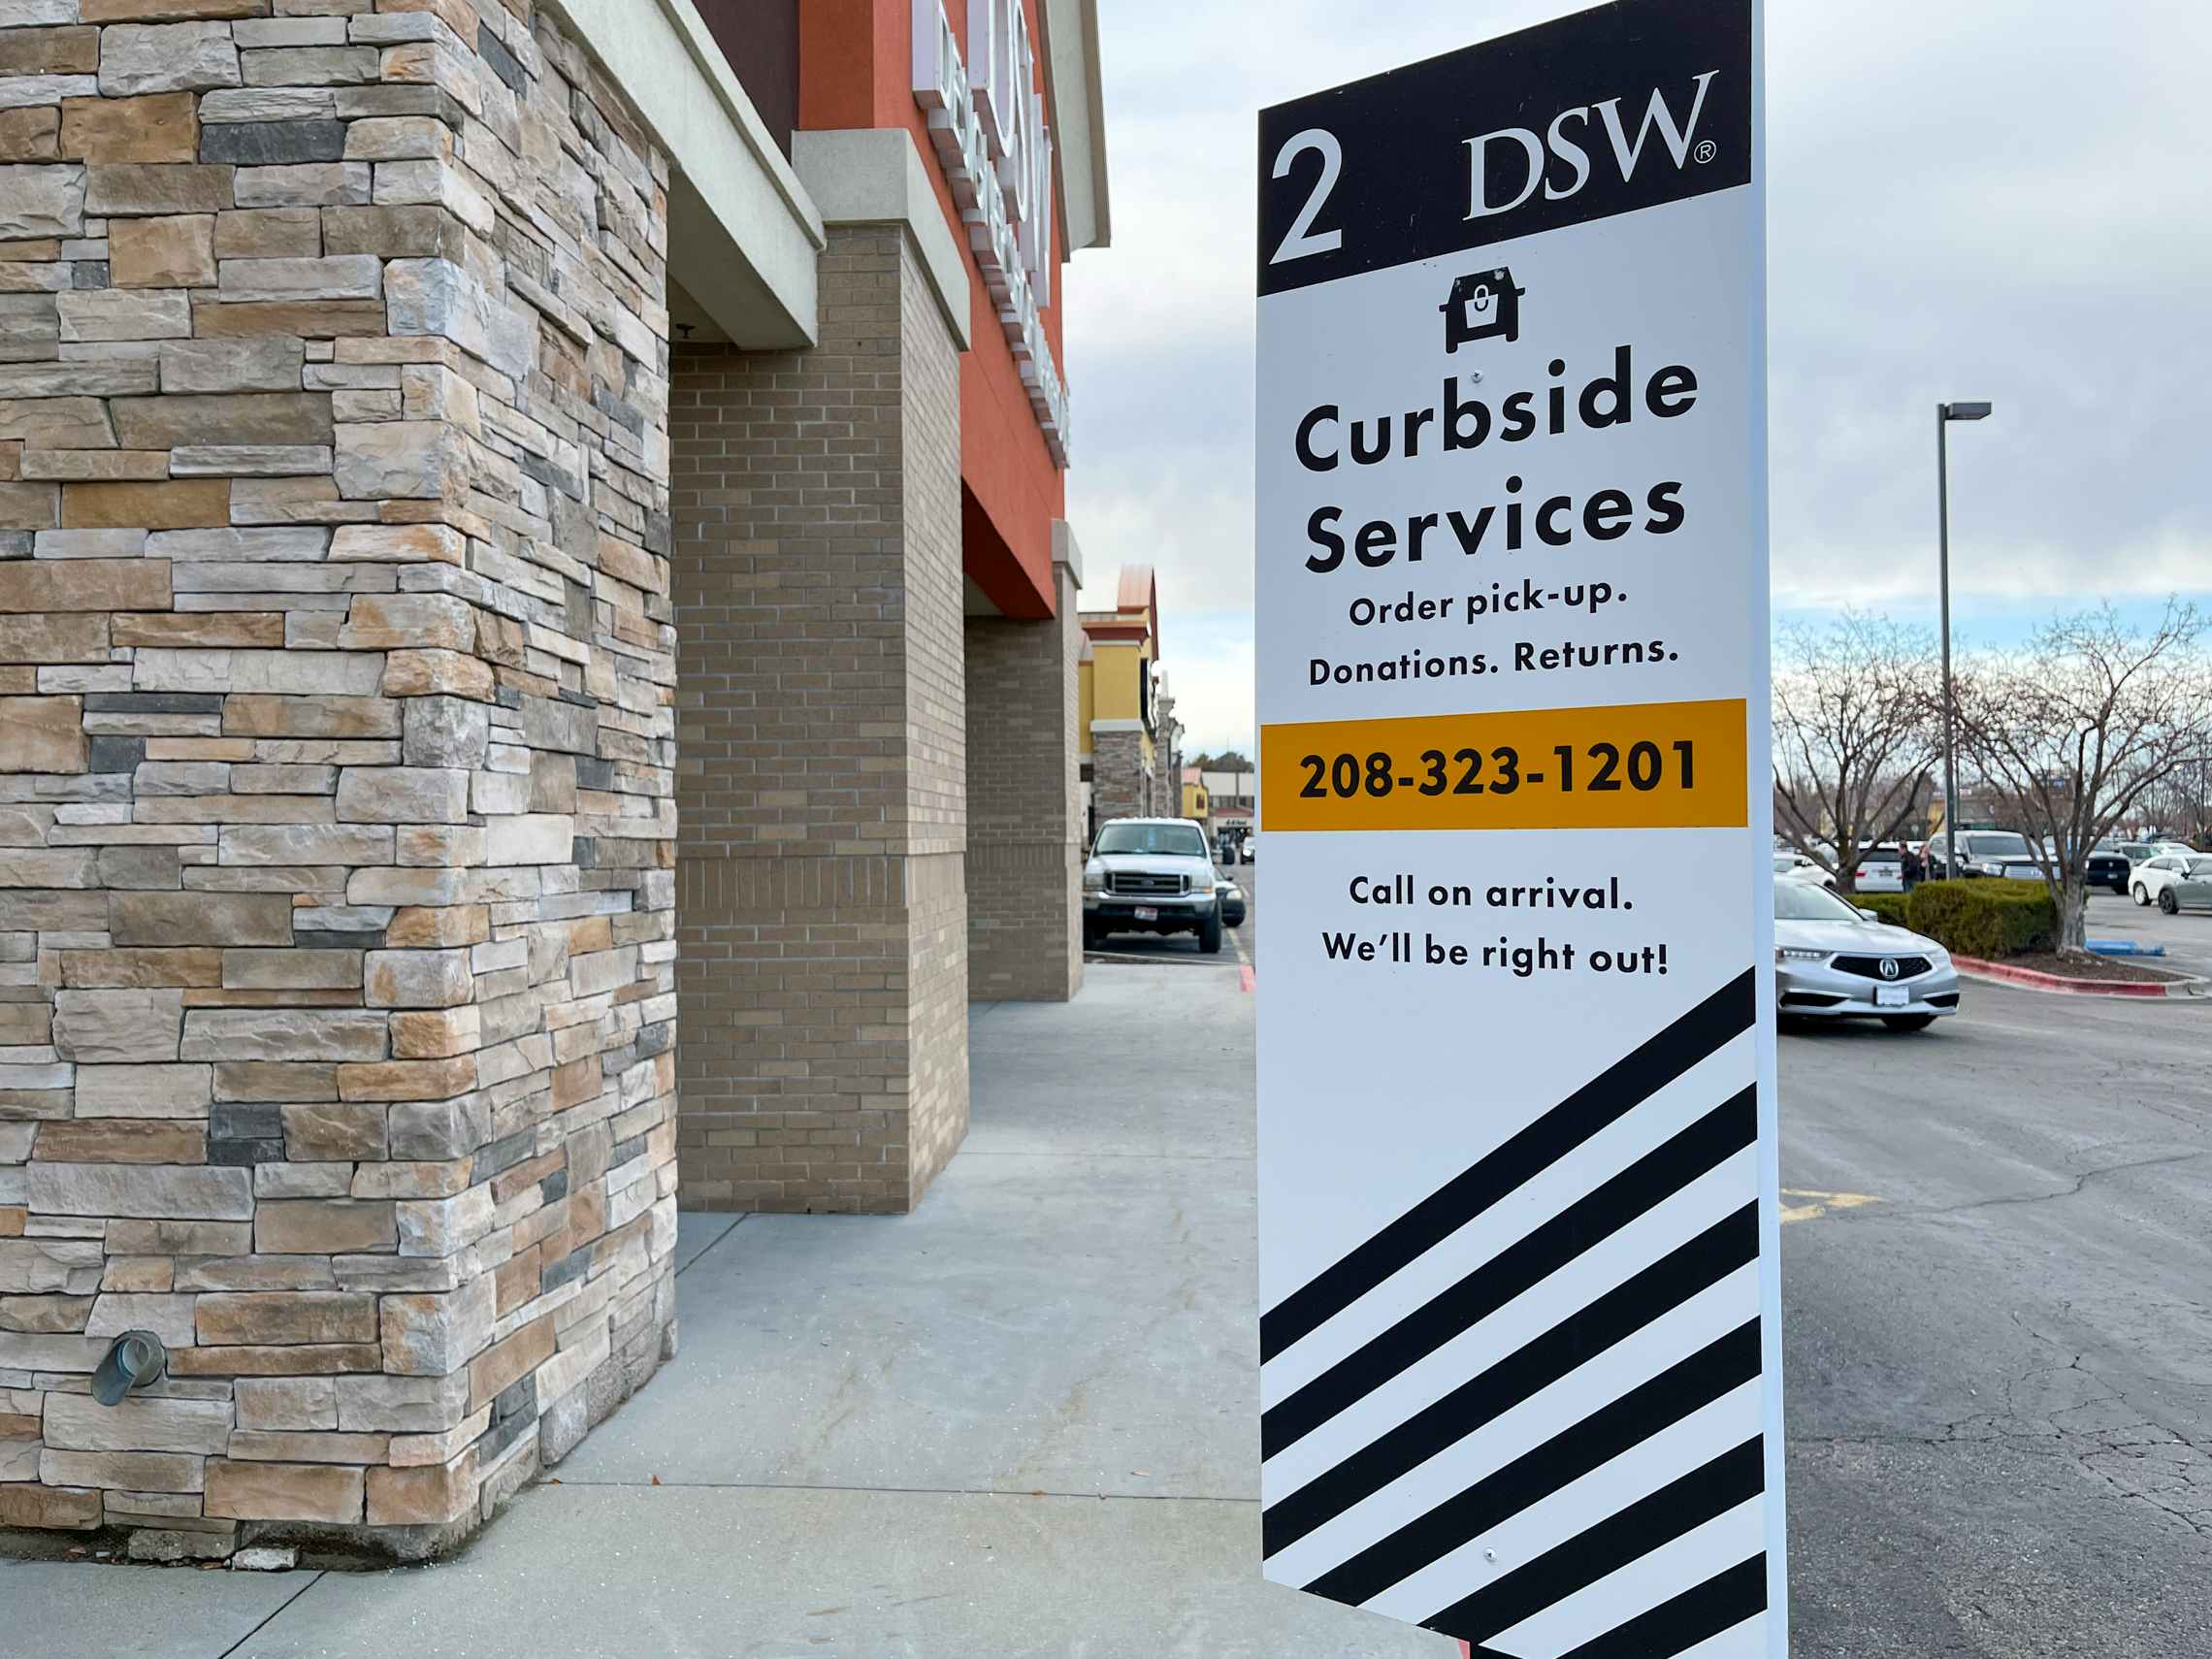 A sign for Curbside Services outside DSW.